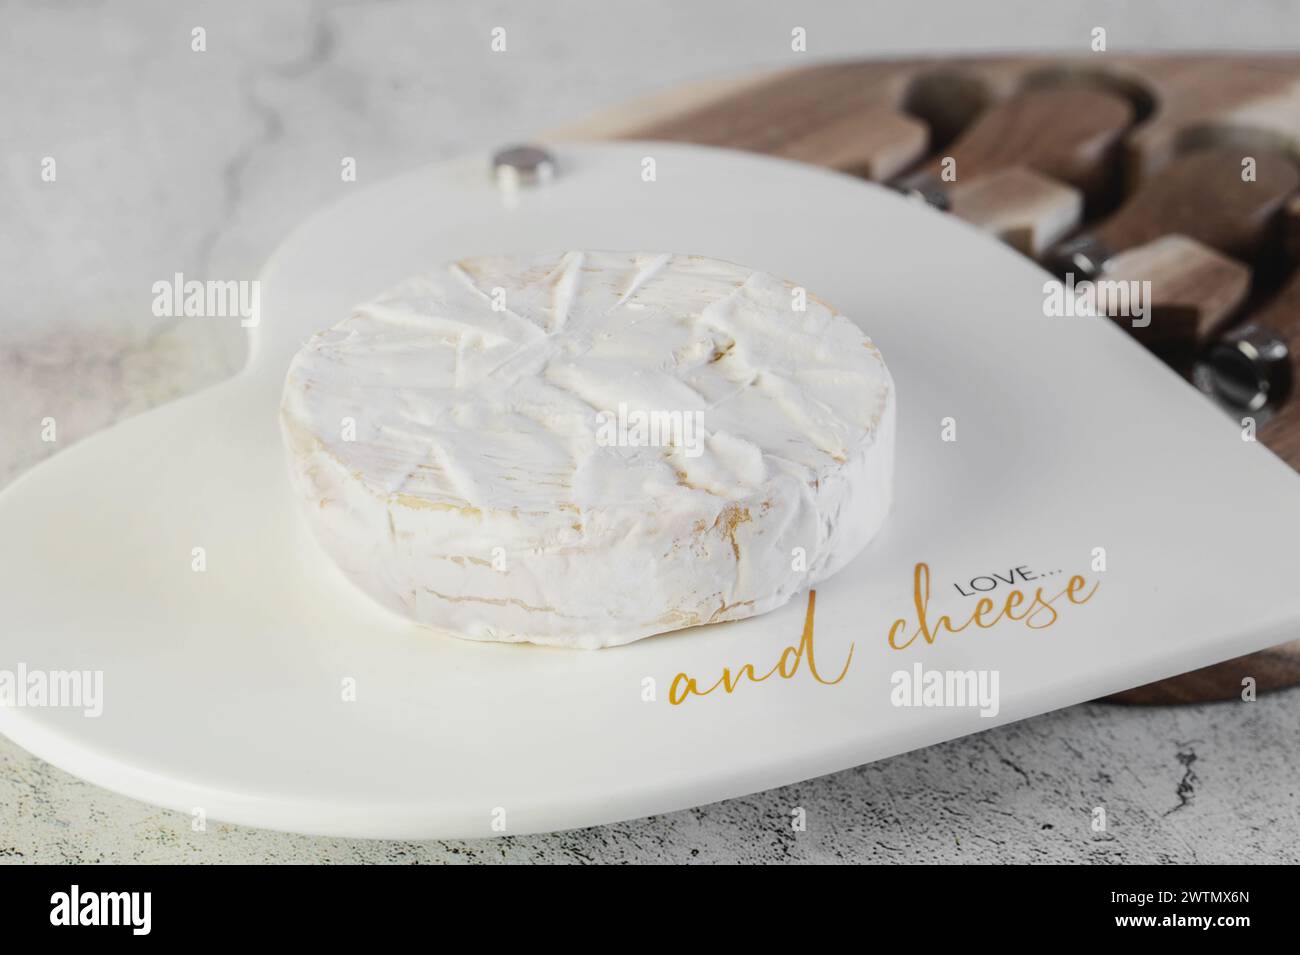 soft cheeses with white mold on a white board. A round small head of brie or camembert cheese. A set of knives and a cheese board on a light backgroun Stock Photo